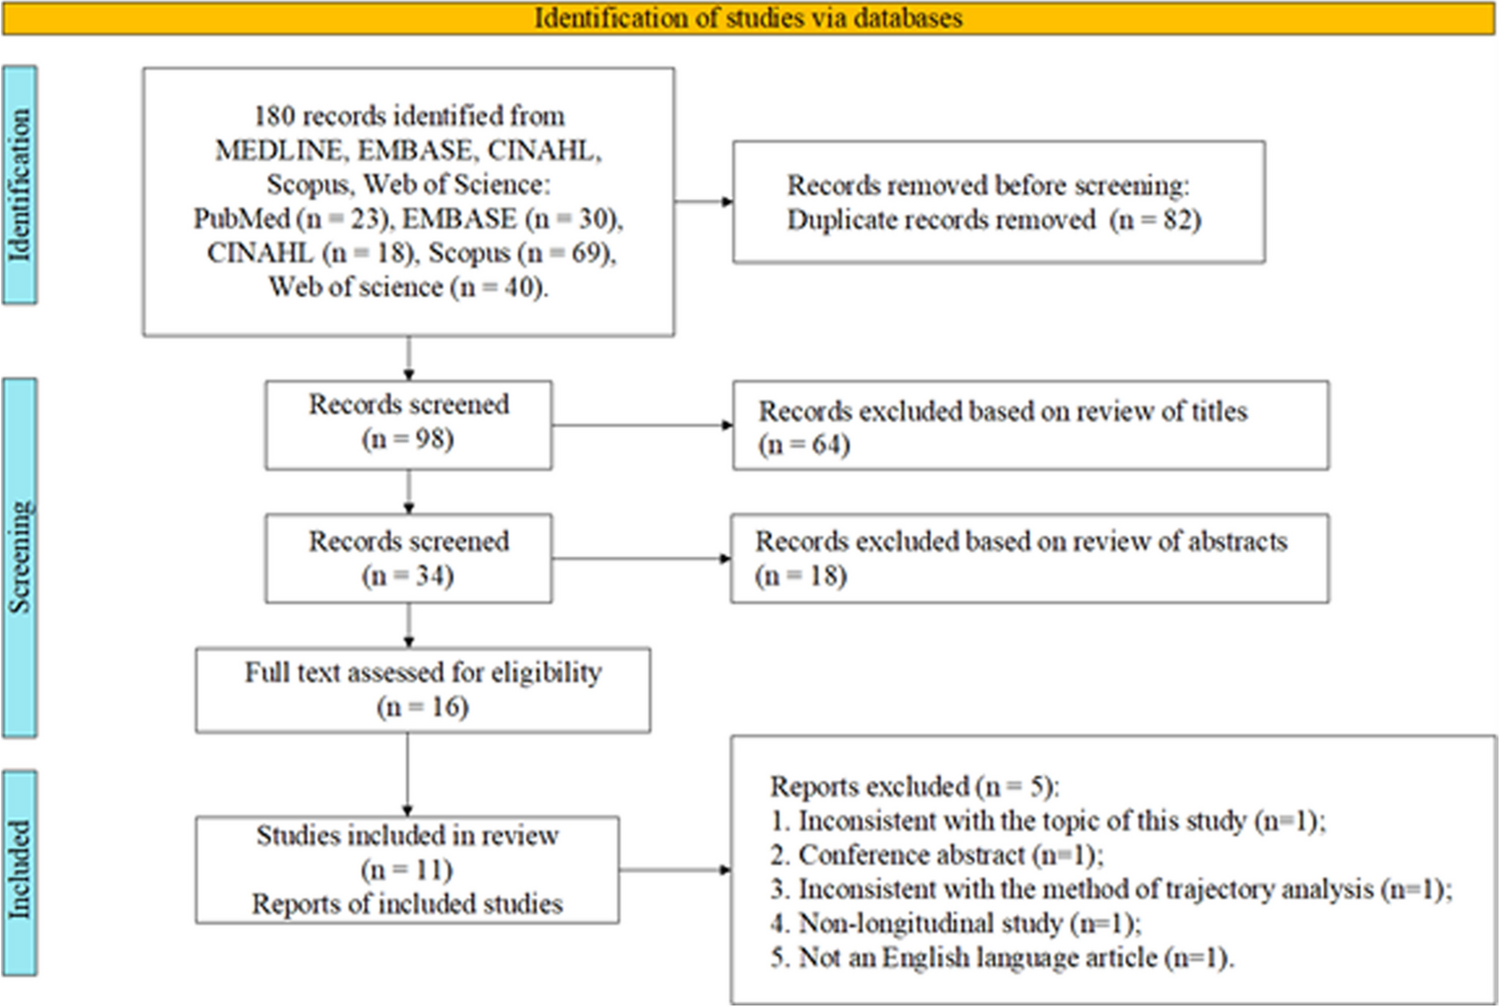 Group-based trajectory modeling for fear of cancer recurrence in cancer survivors: a systematic review